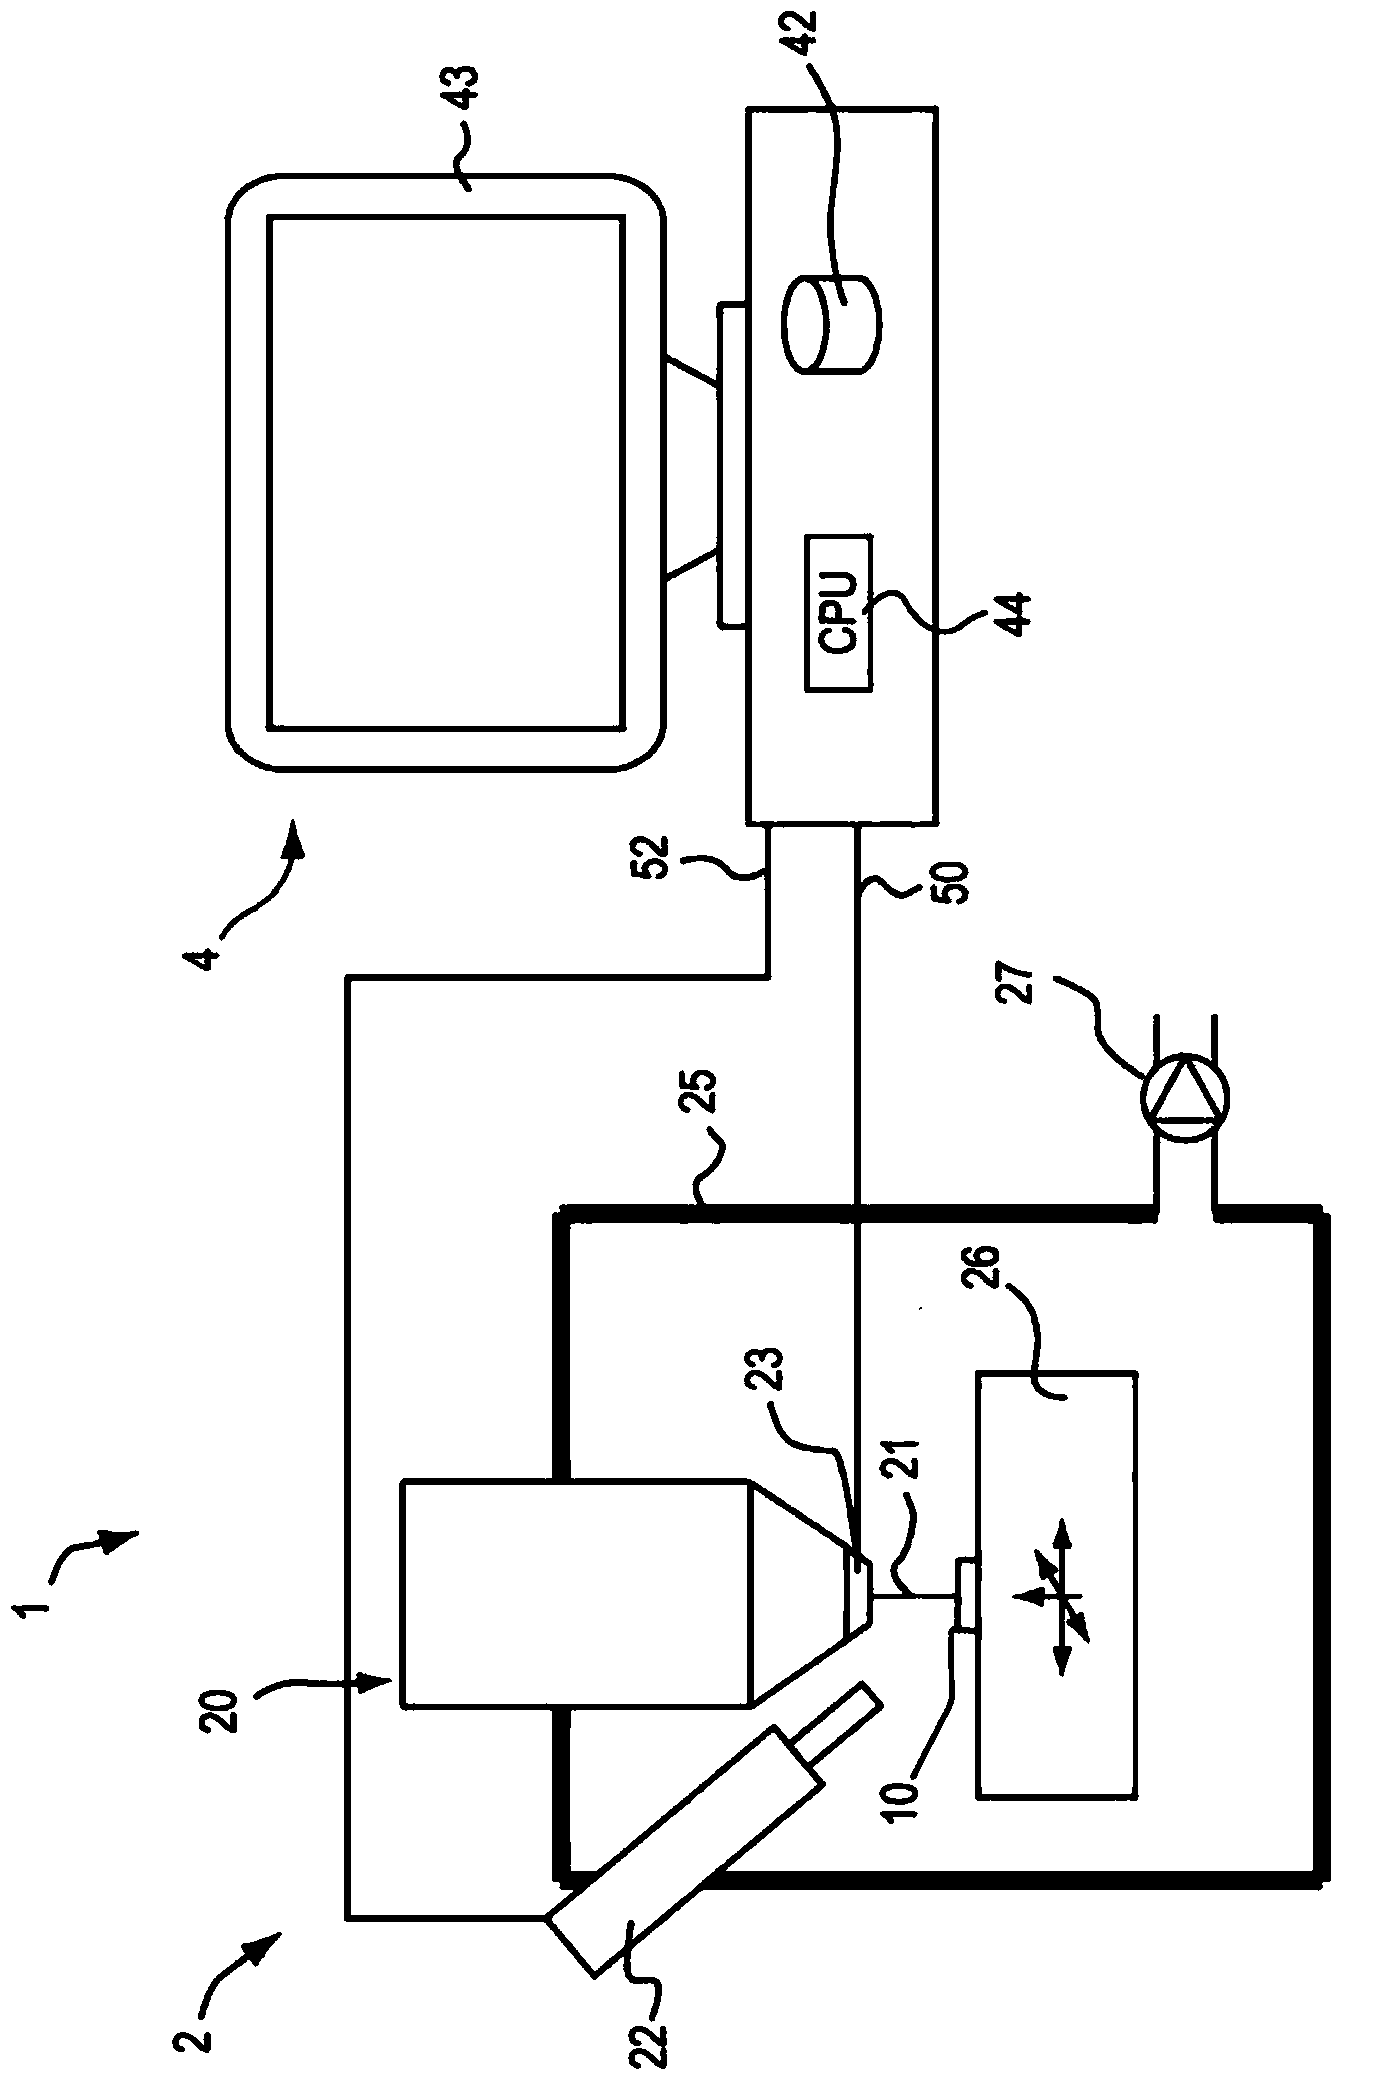 Method and data analysis system for semi-automated particle analysis using a charged particle beam